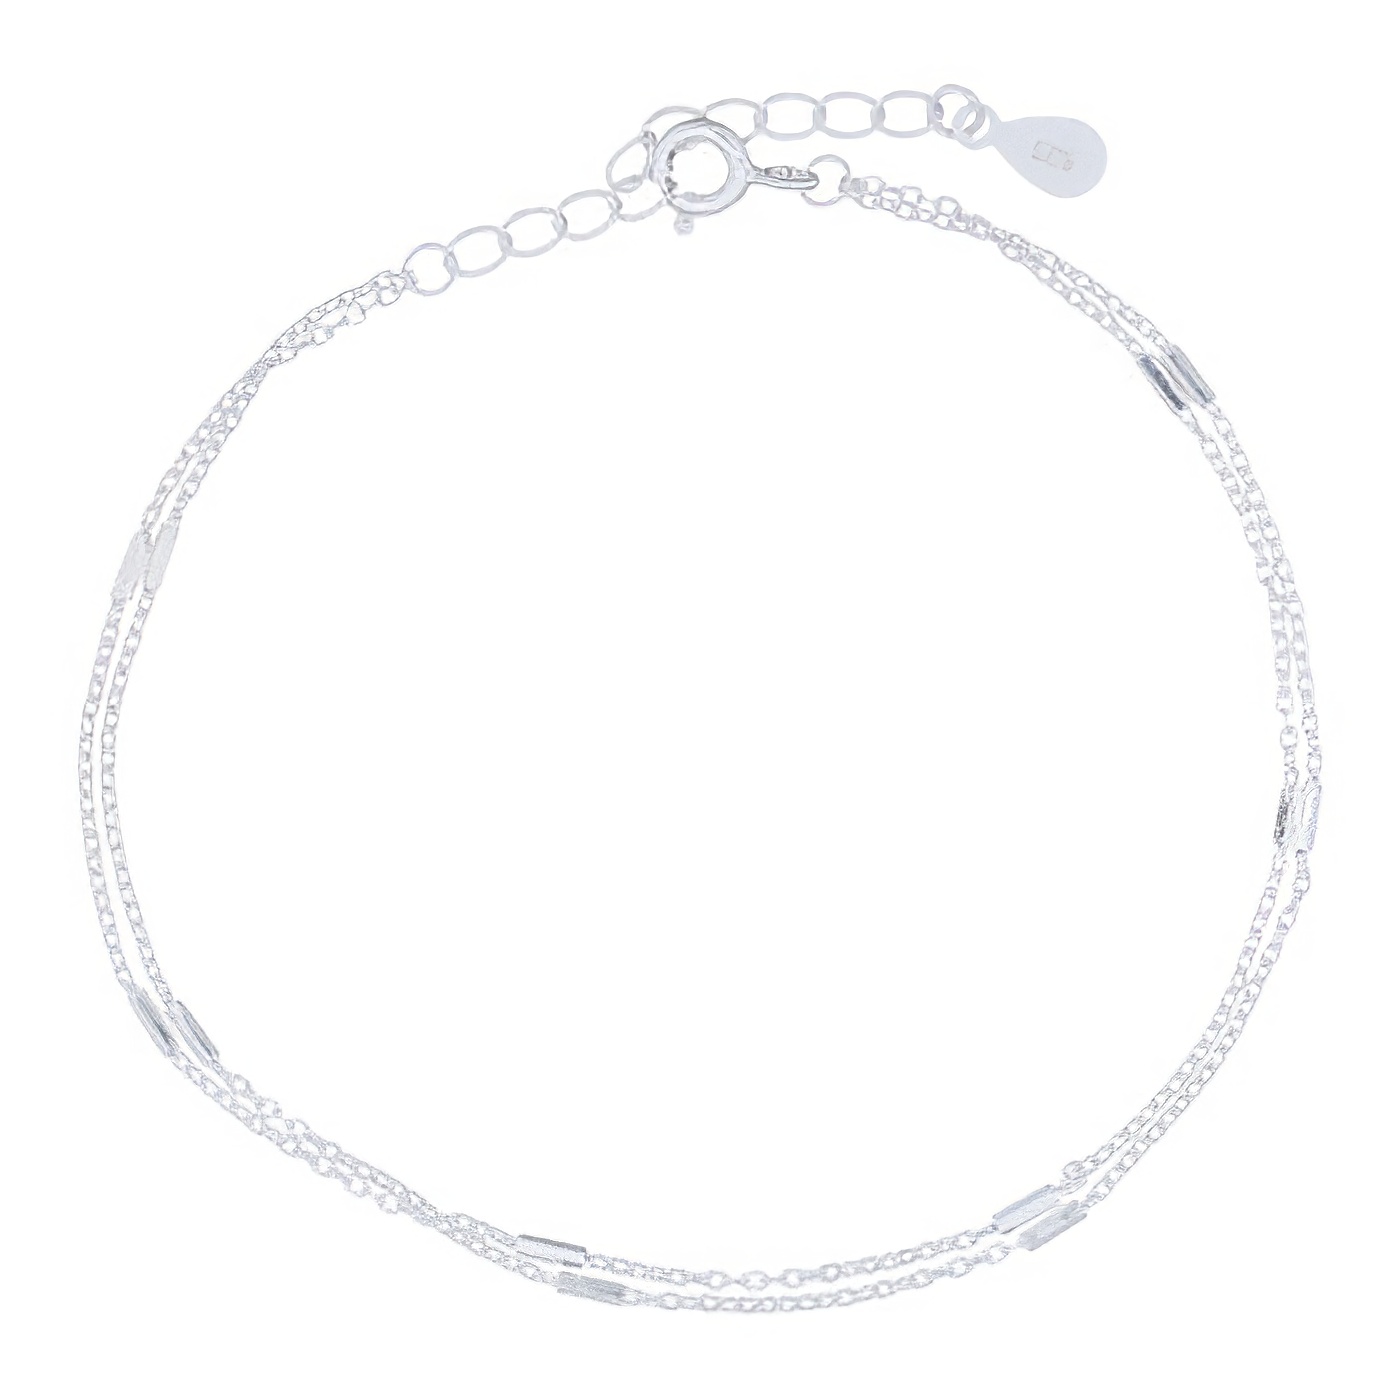 Sticks In Double Layers Of Flat Silver Plated 925 Chains Bracelets 